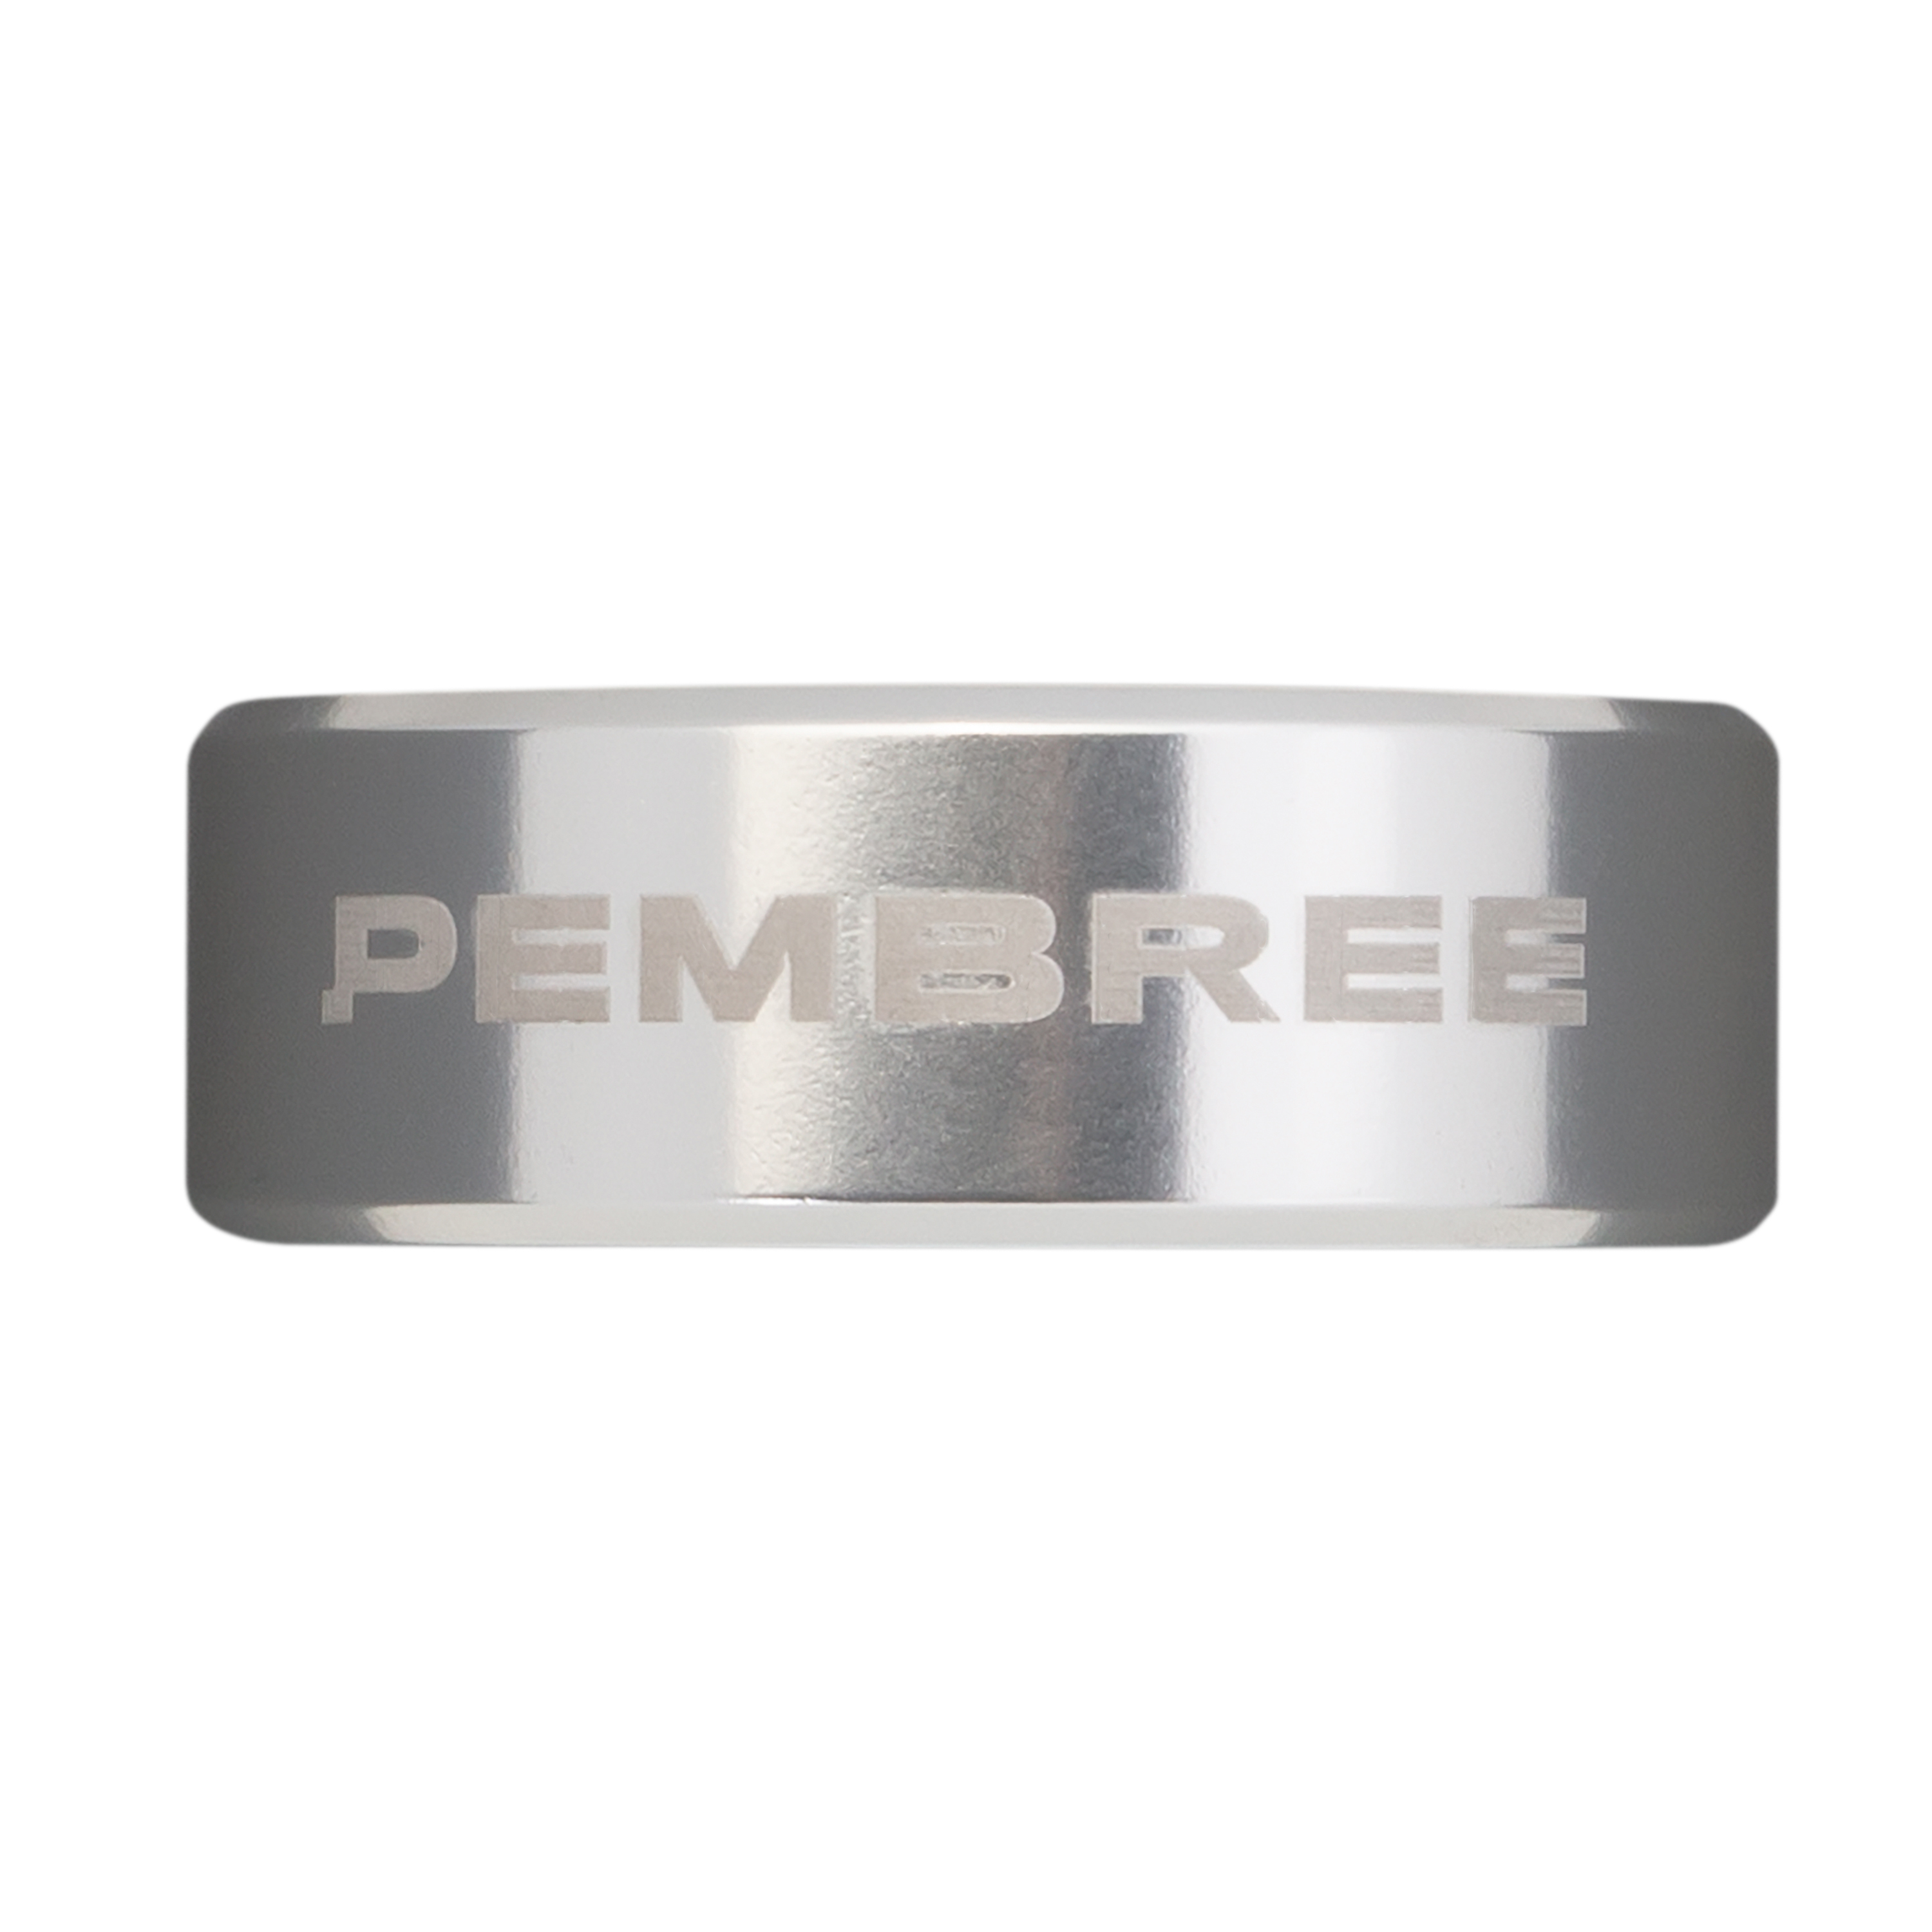 PEMBREE-DBN-Seat-Post-Clamp-Silver-Front.jpg